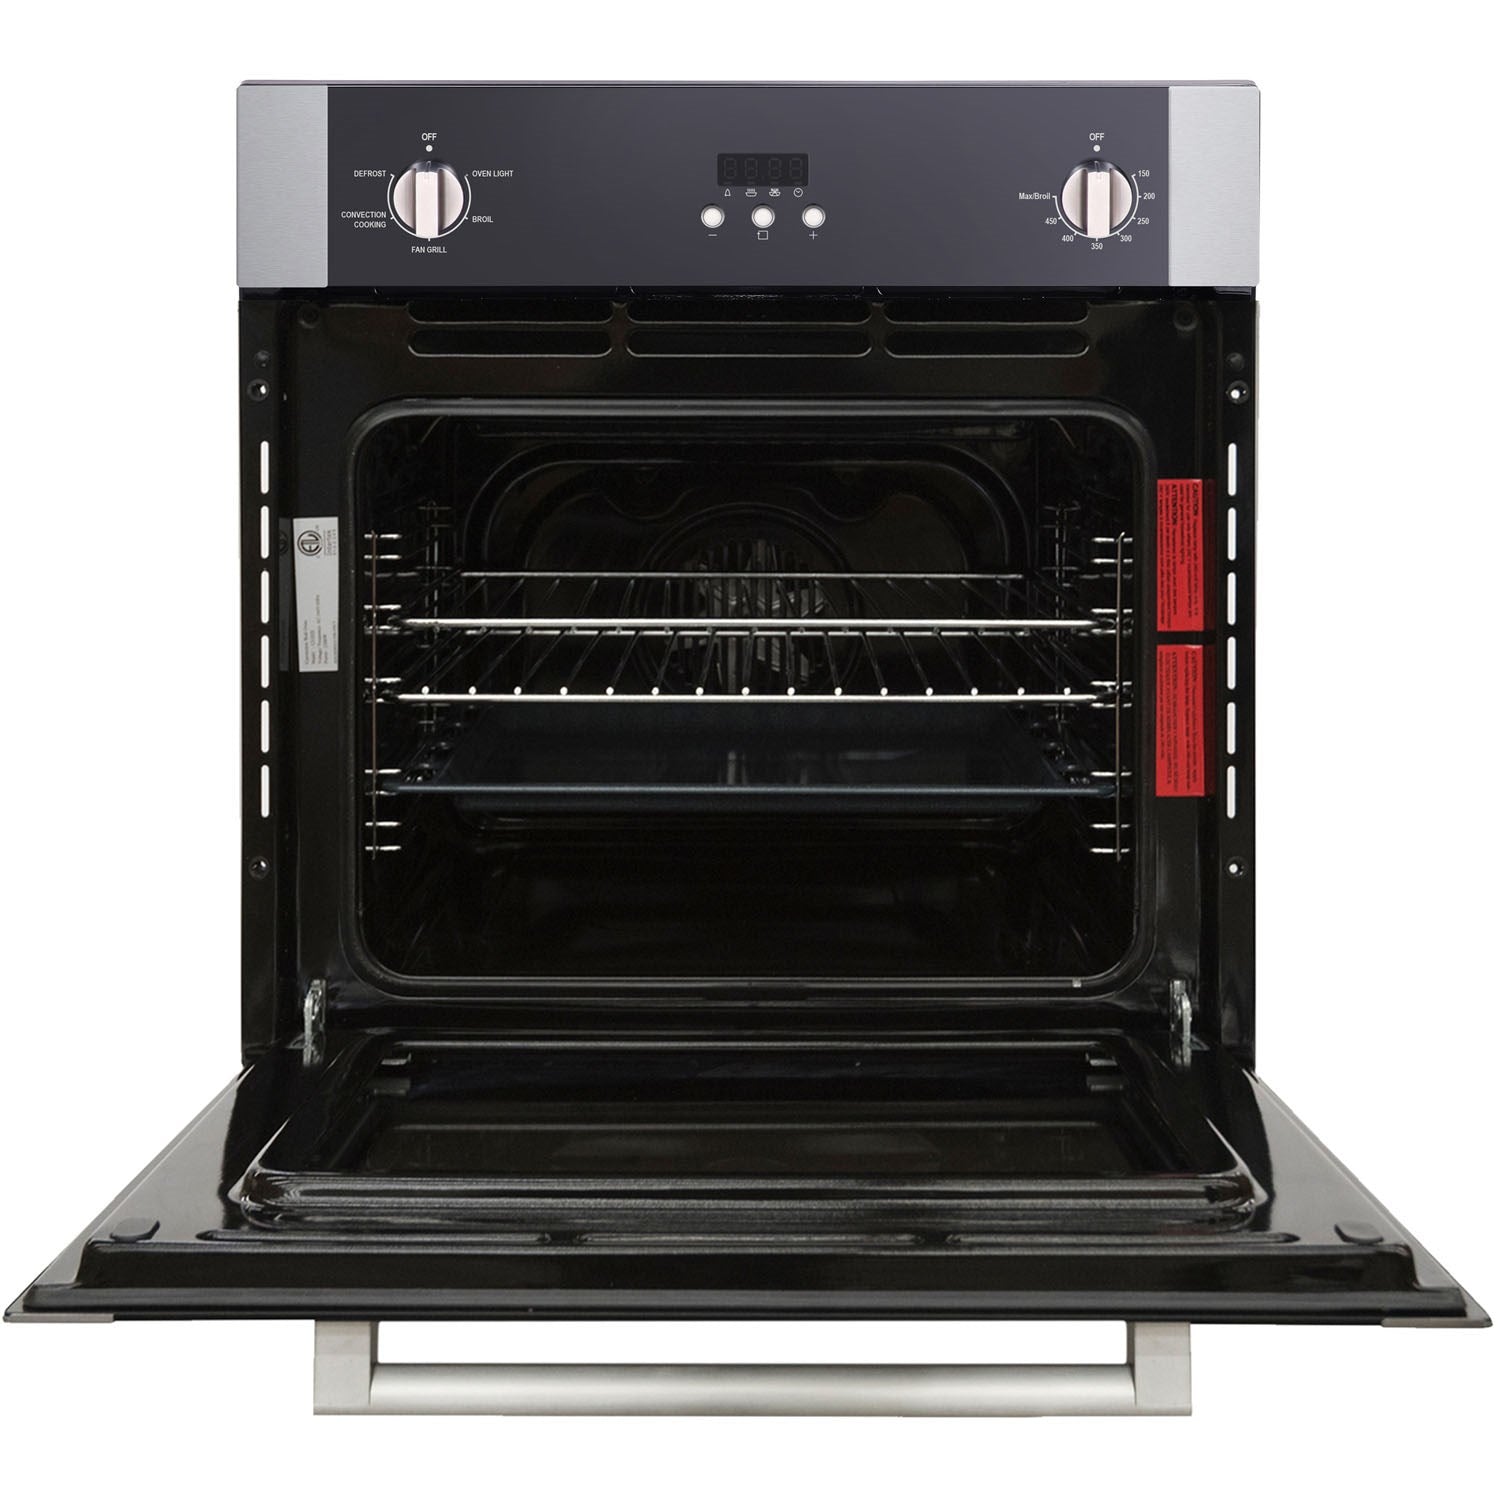 Using the Grill - Wall Oven - Product Help